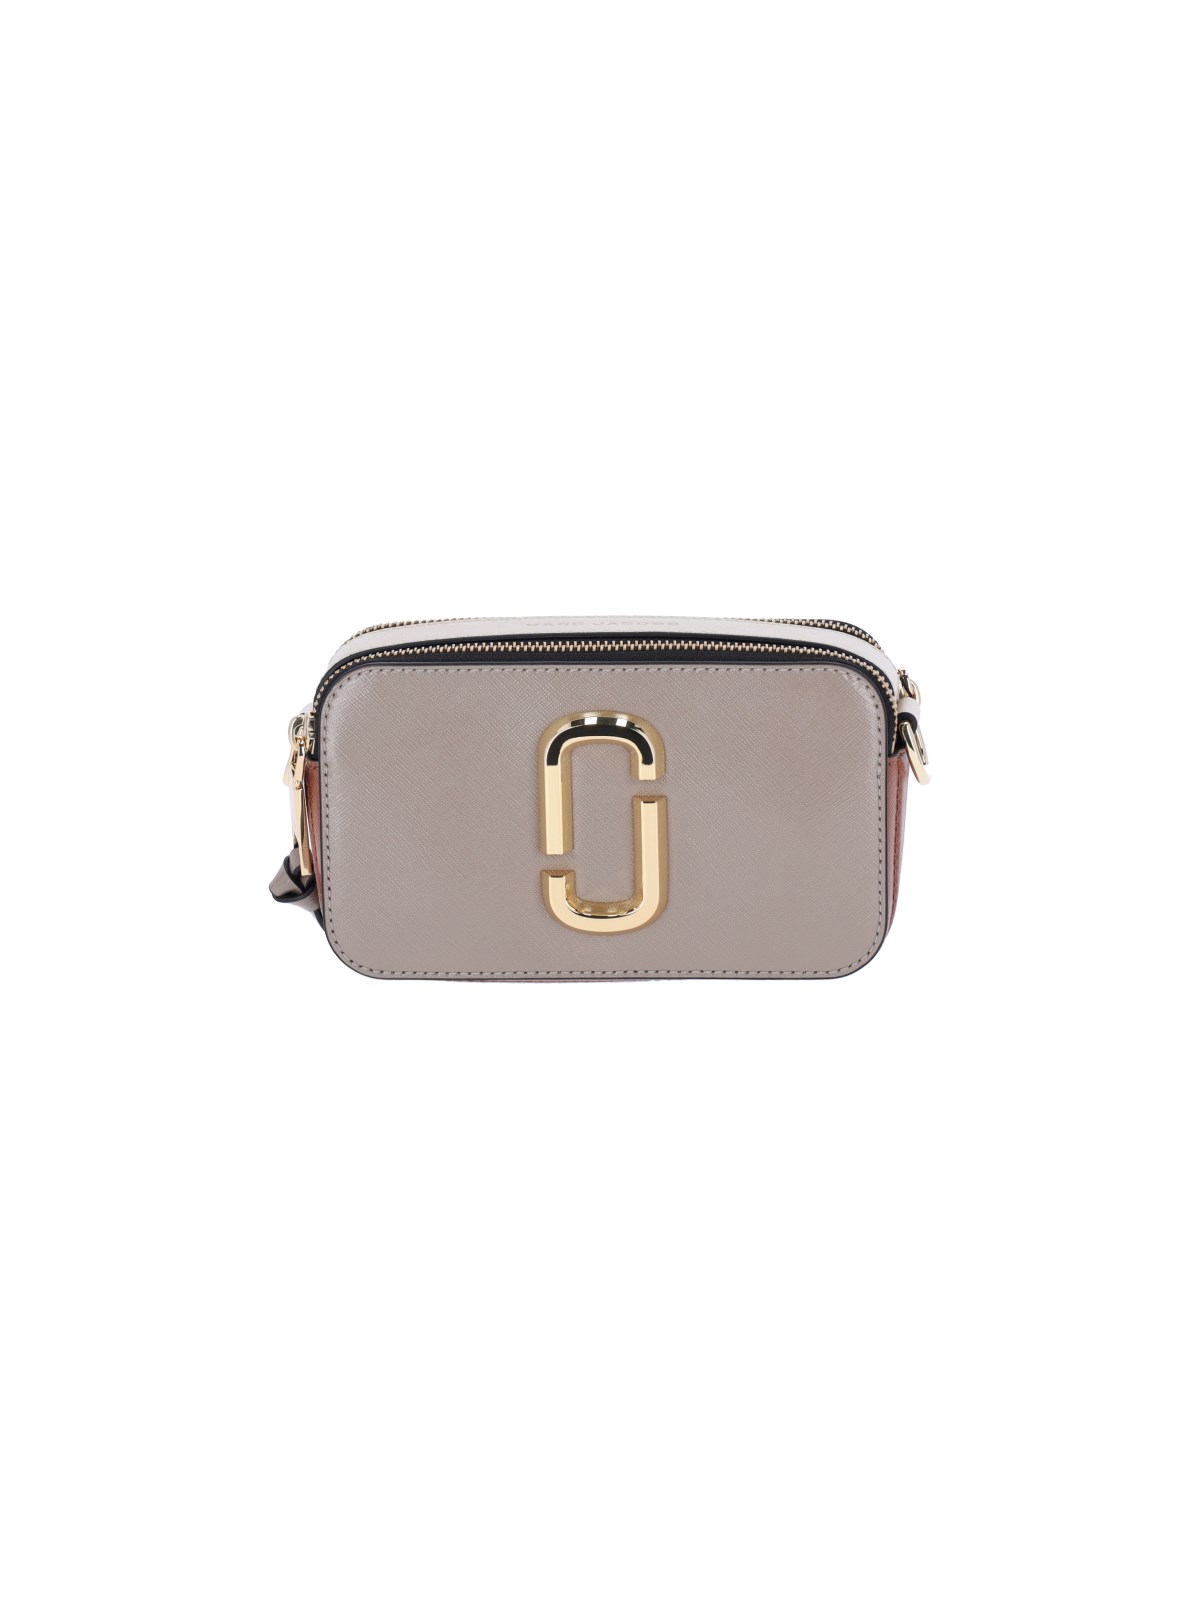 Marc Jacobs "the Snapshot" Crossbody Bag In Gray